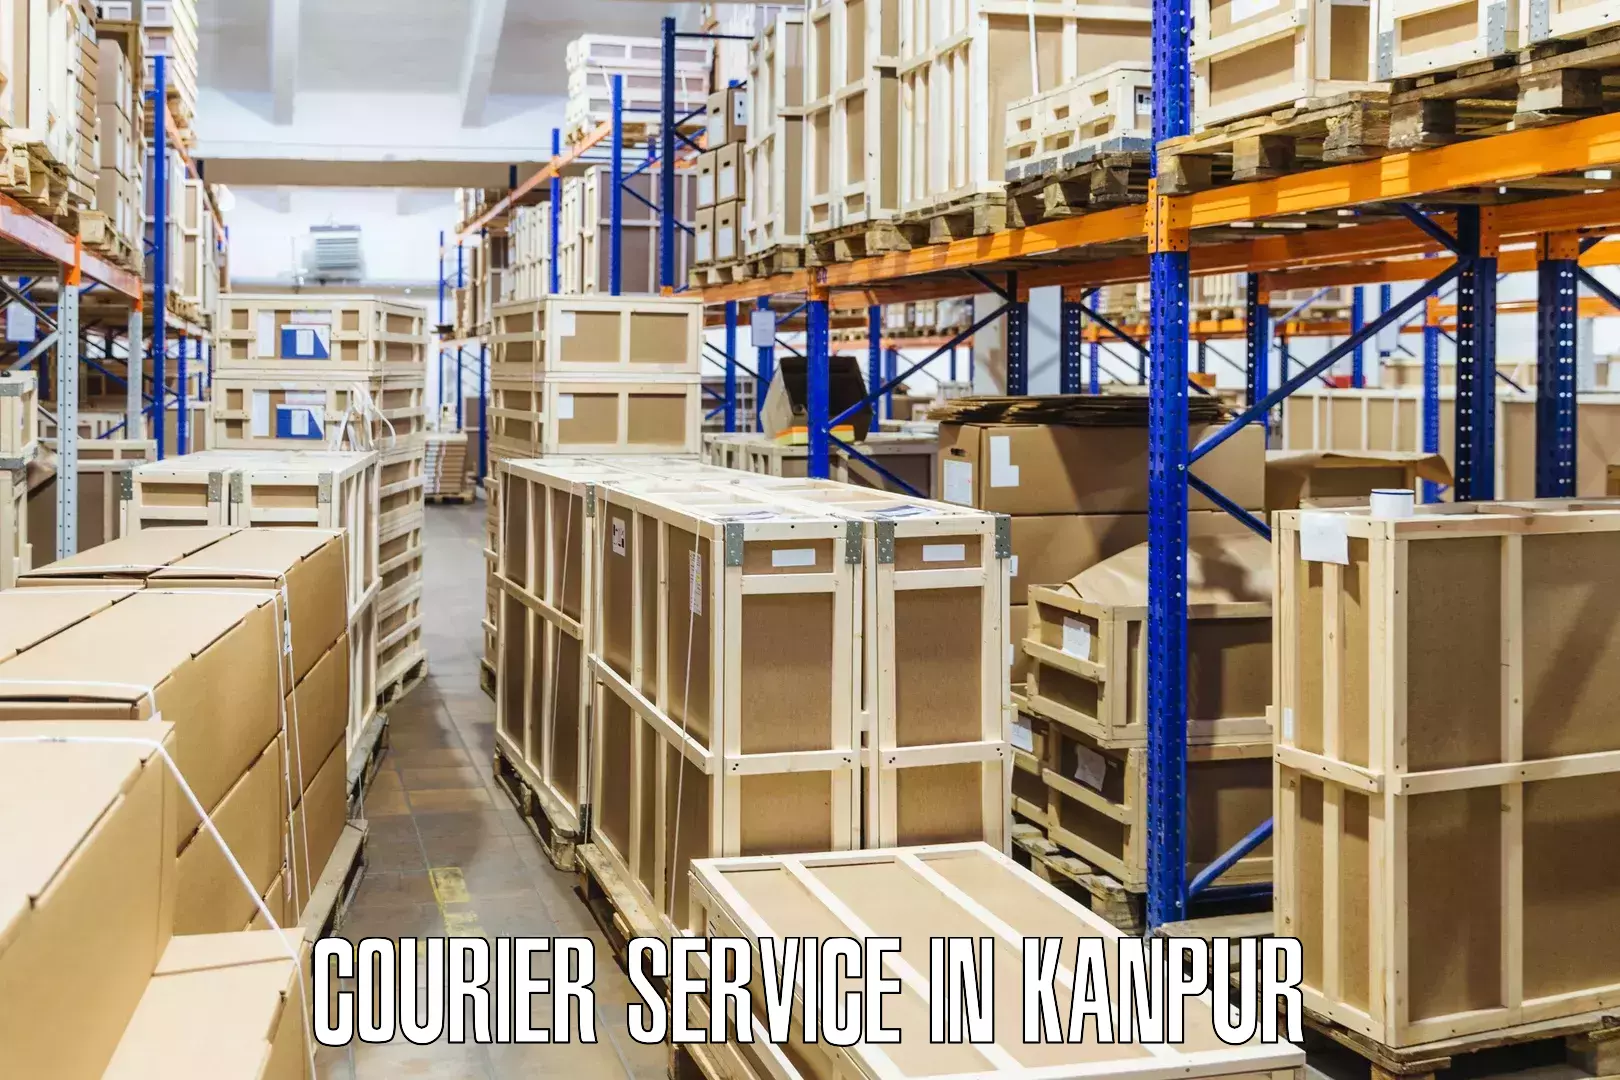 Global shipping solutions in Kanpur